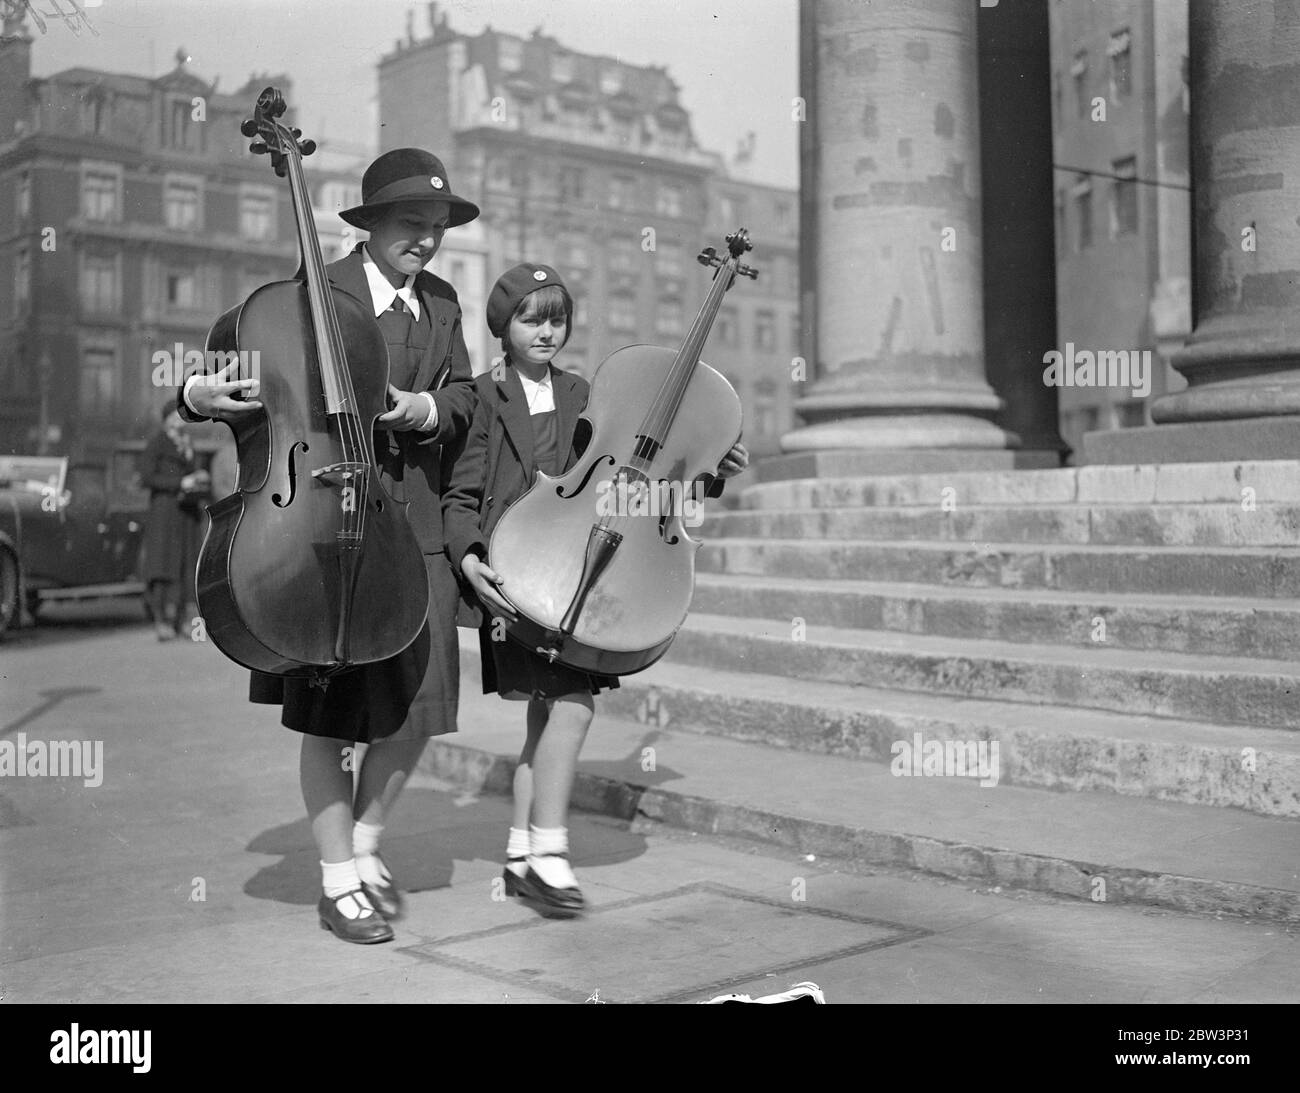 London ' s Musical Children Play At The Queen ' s Hall . Hundreds of young musicians are taking part in the School Orchestra and Junior Band Festival at Queen ' s Hall , London . Photo shows : Girl musicians arriving at the Queen ' s Hall with their cellos . 16 May 1936 Stock Photo